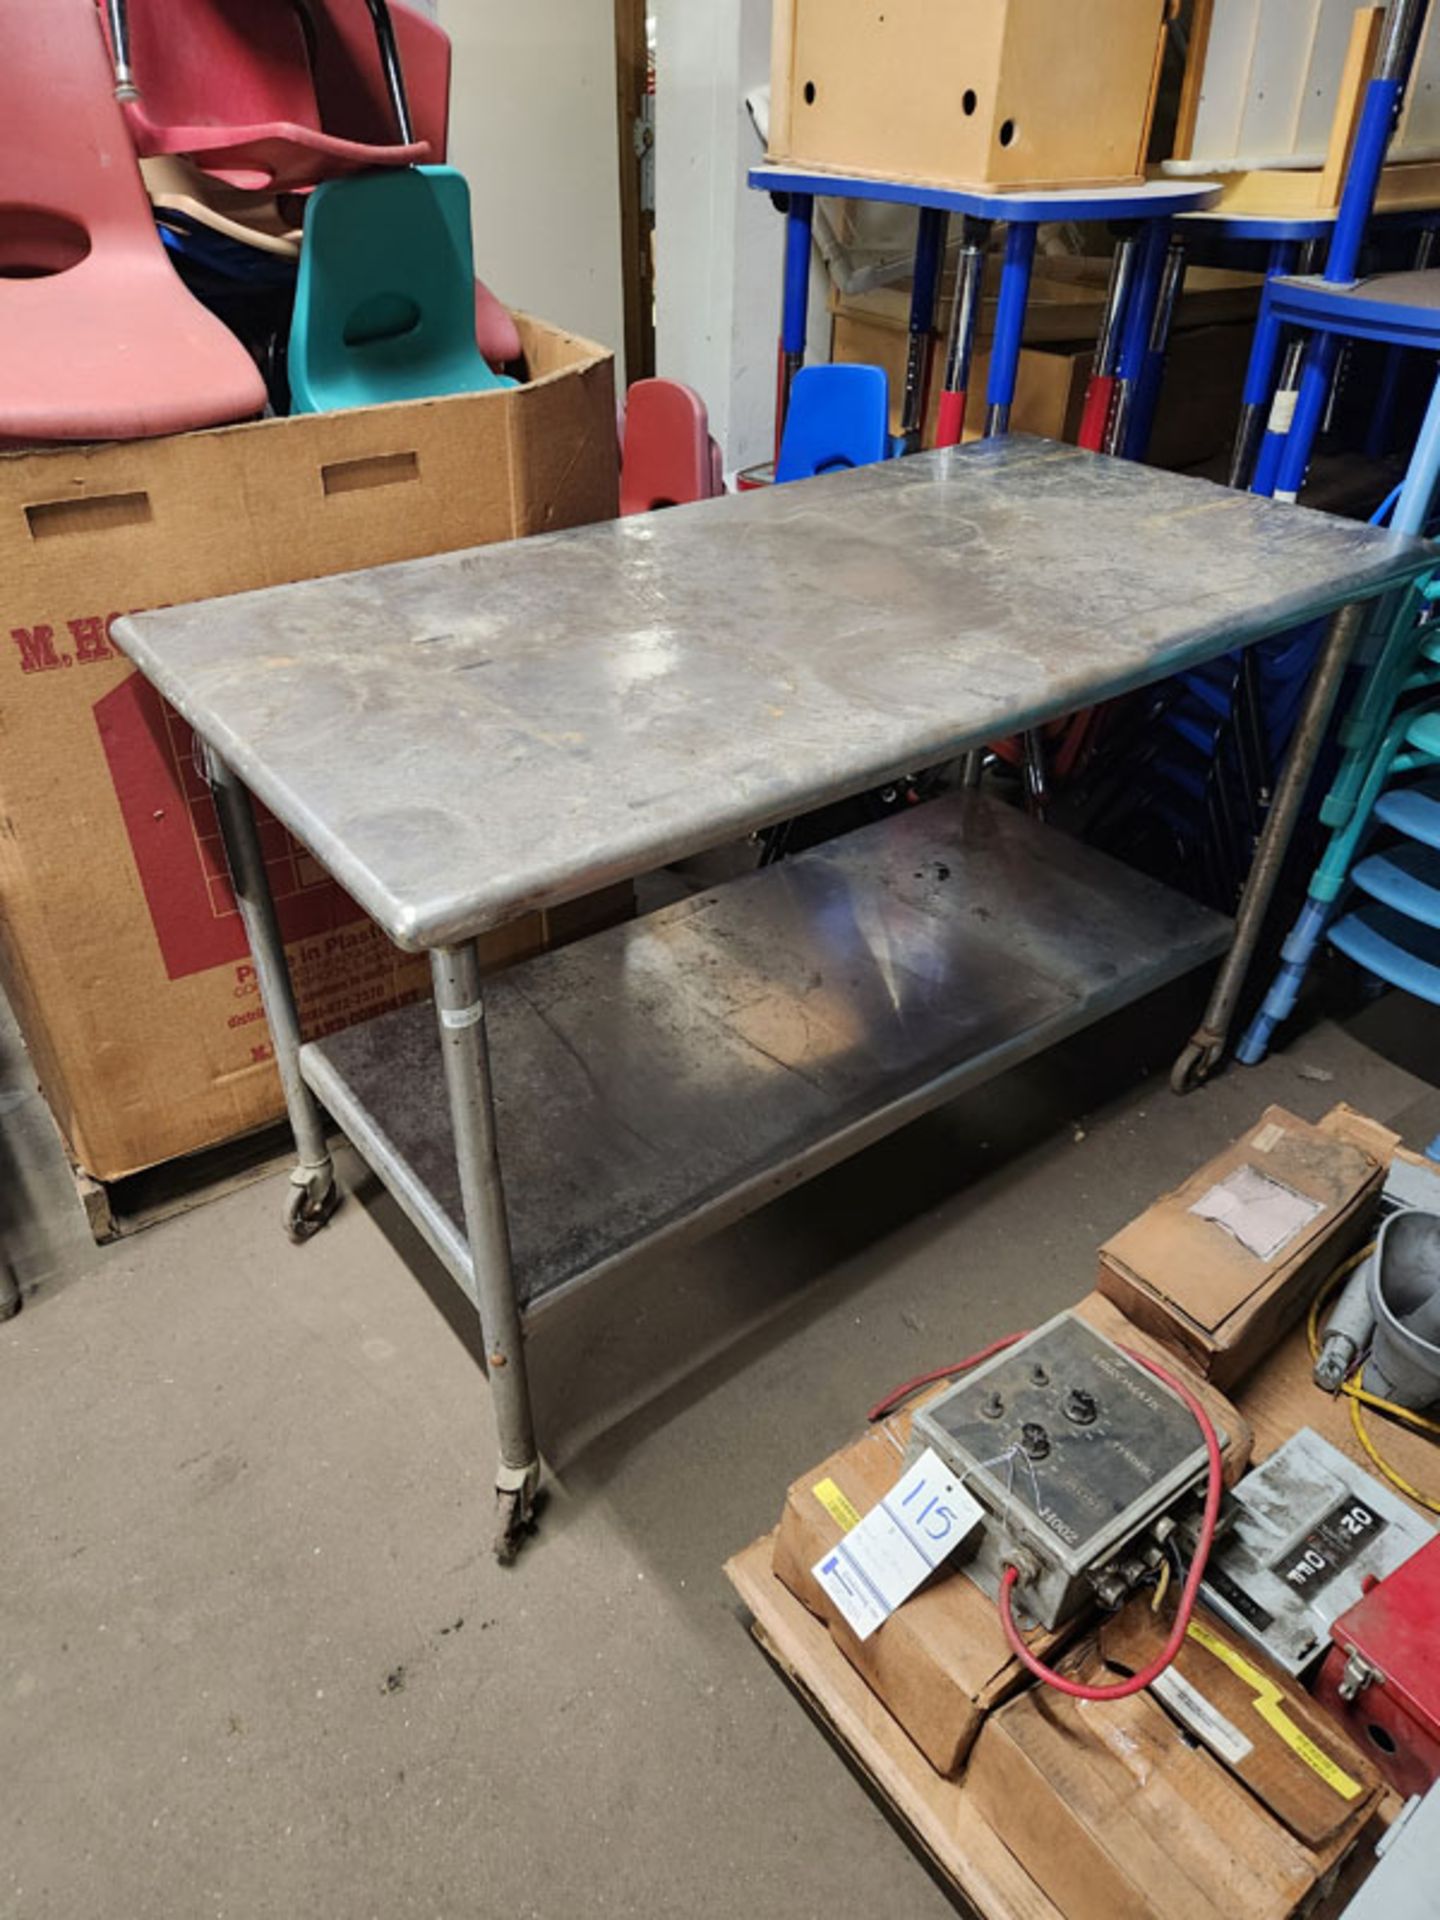 STAINLESS STEEL PREP TABLE 60"x30"x38" - USED AS A SHOP TABLE